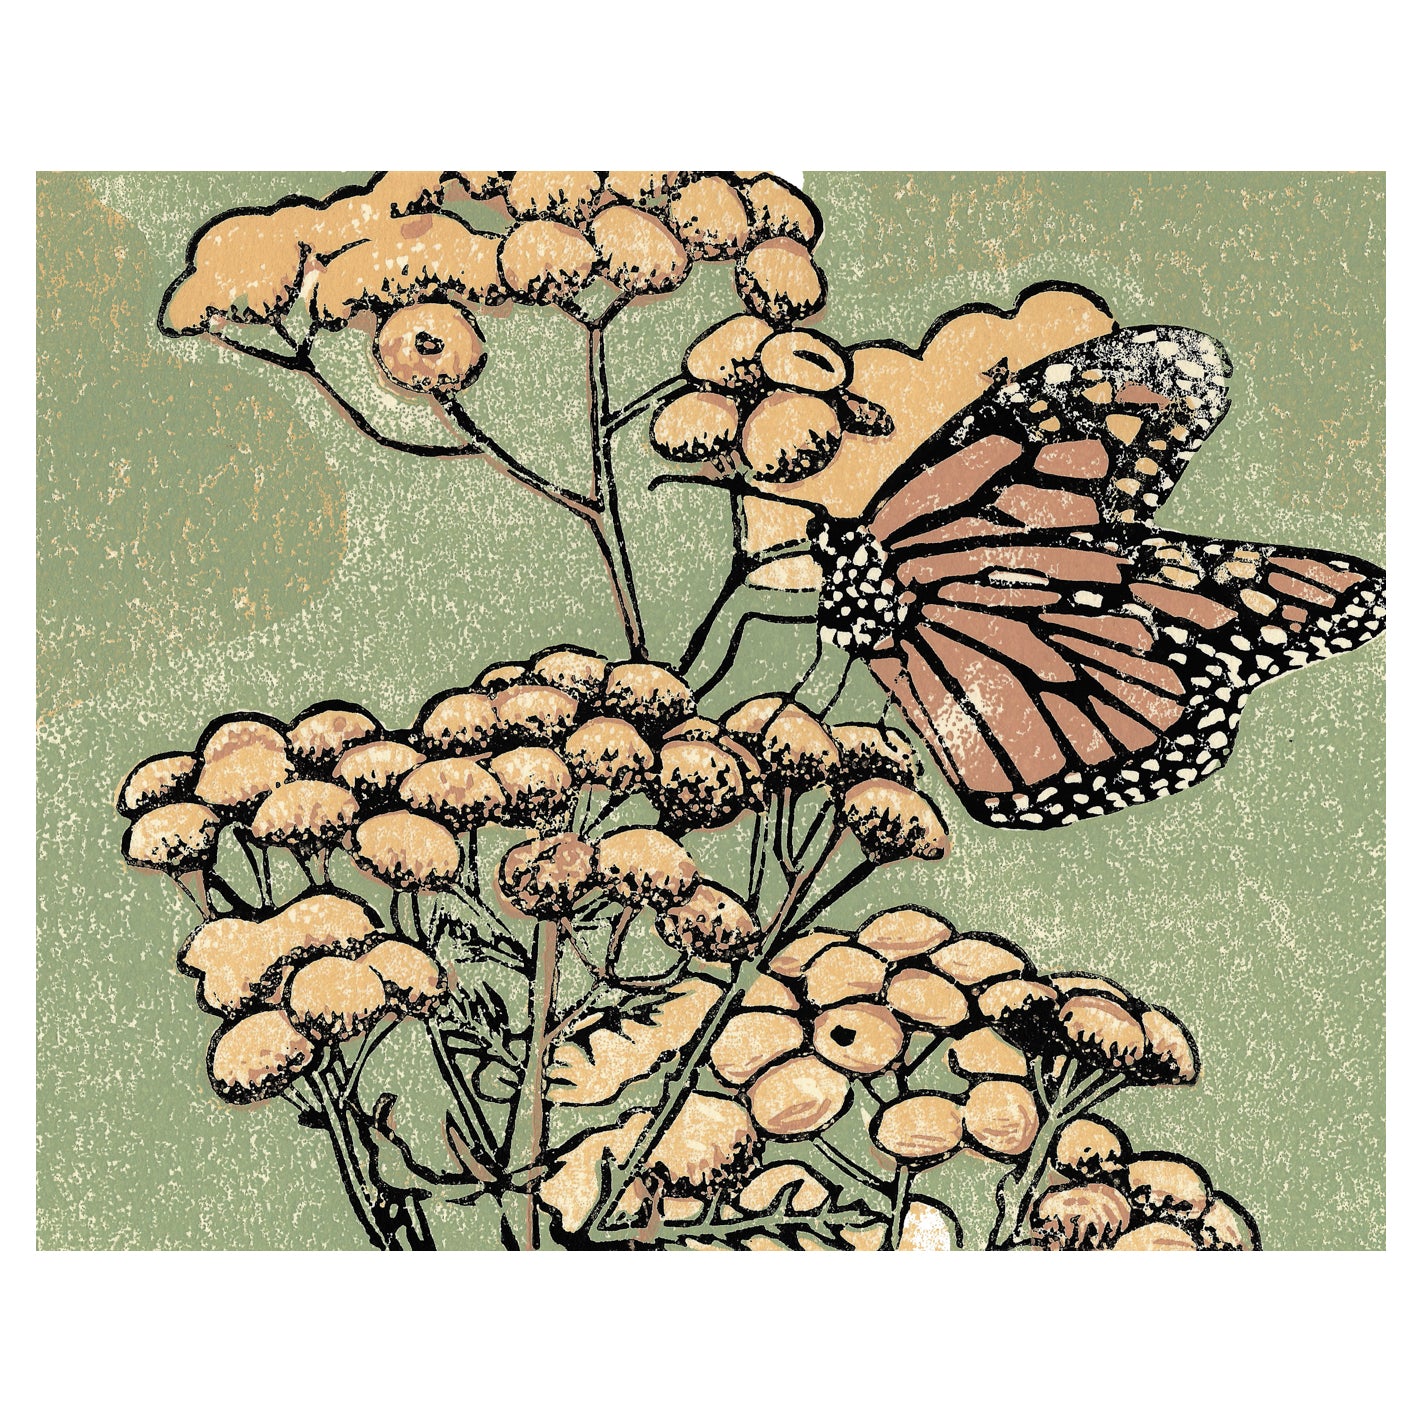 Monarch butterfly art by printmaker Natalia Wohletz of Peninsula Prints titled Monarch on Tansy.